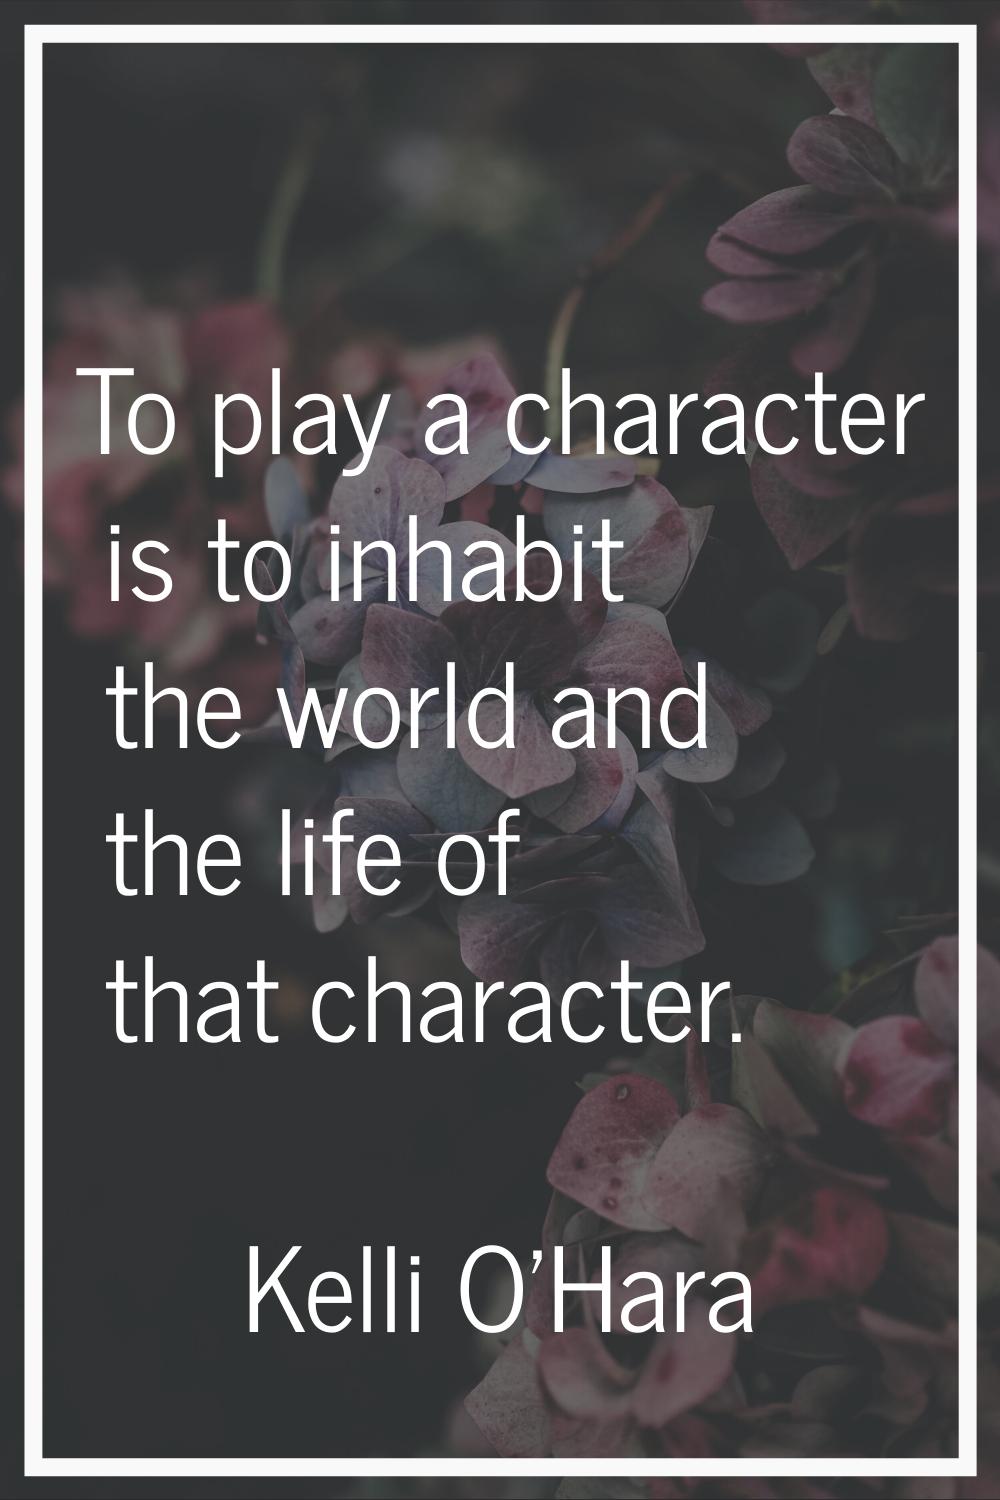 To play a character is to inhabit the world and the life of that character.